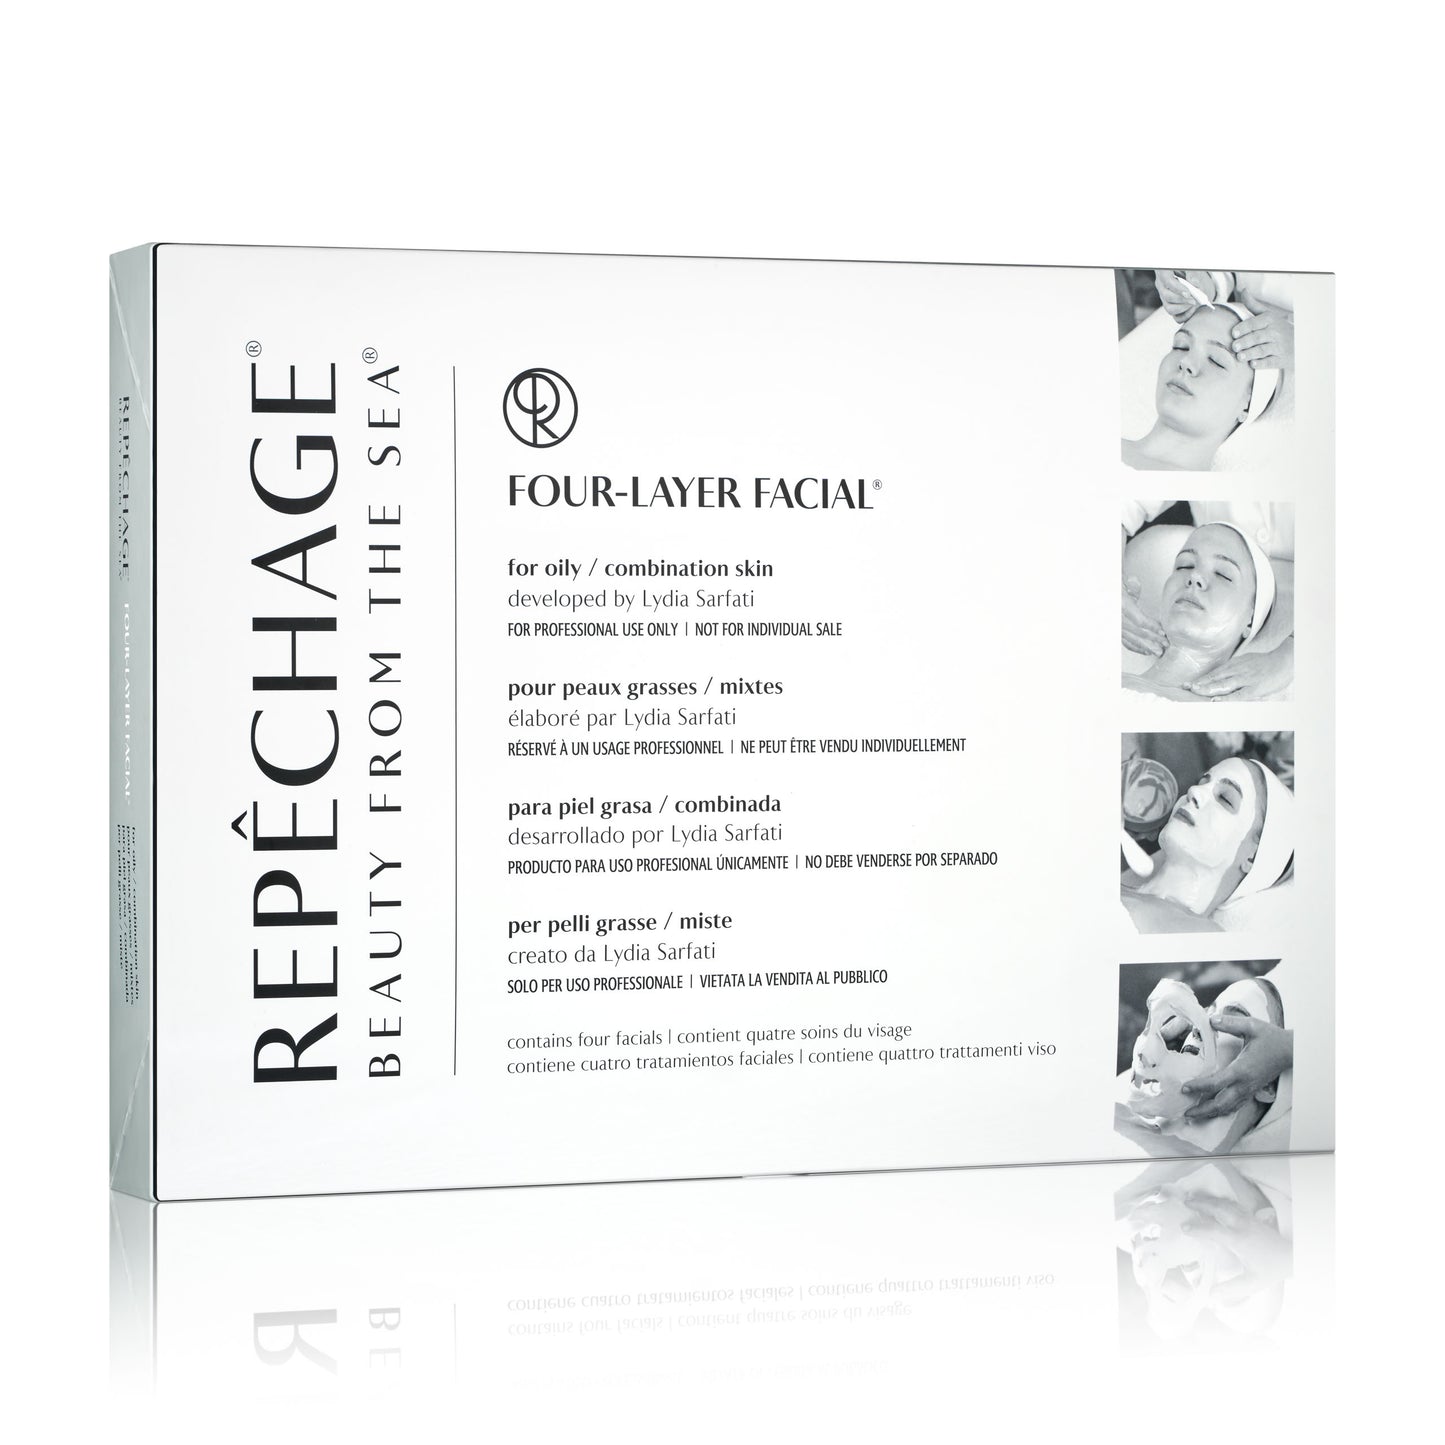 Repechage 4 Layer Facial for Oily Skin, 4 Treatments